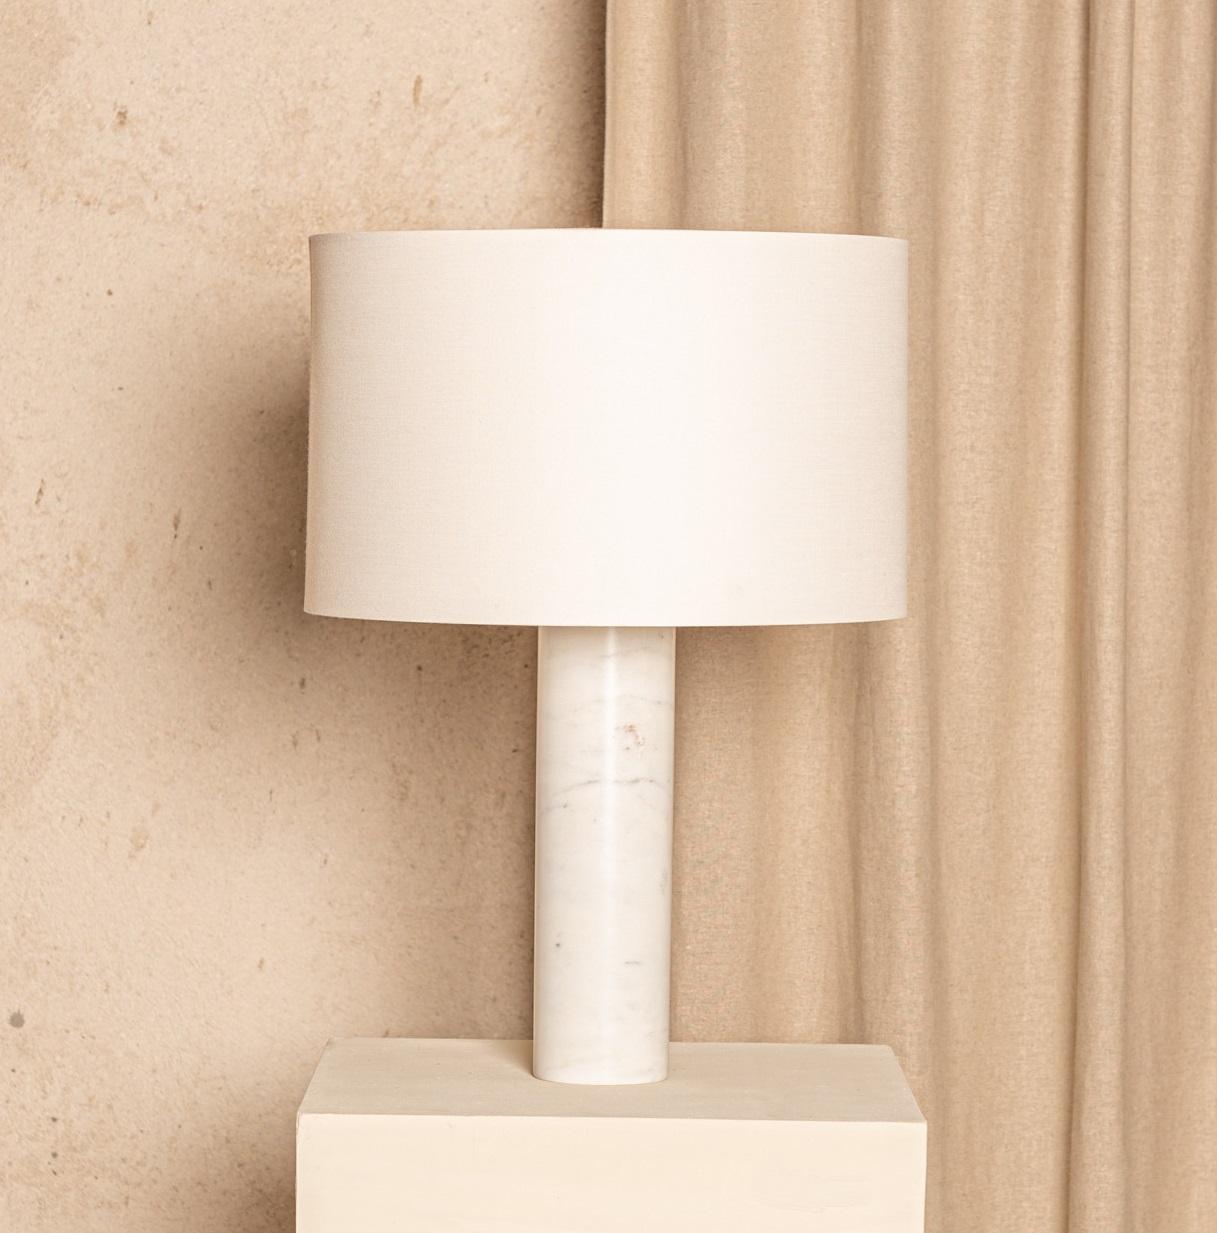 White Marble Pipo Table Lamp by Simone & Marcel
Dimensions: Ø 40 x H 58 cm.
Materials: Cotton and white marble.

Also available in different marble and wood options and finishes. Custom options available on request. Please contact us. 

All our